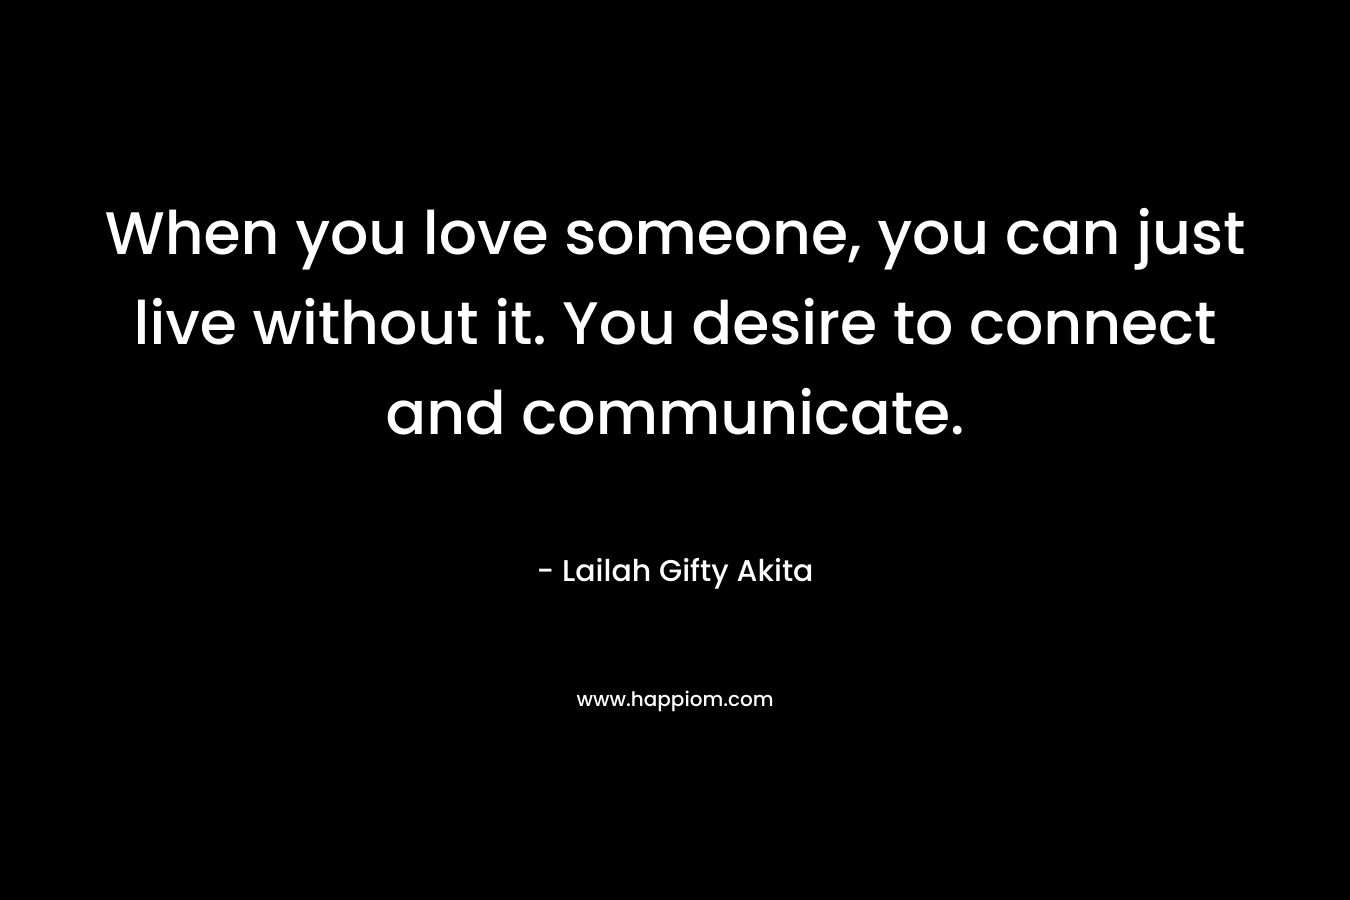 When you love someone, you can just live without it. You desire to connect and communicate.